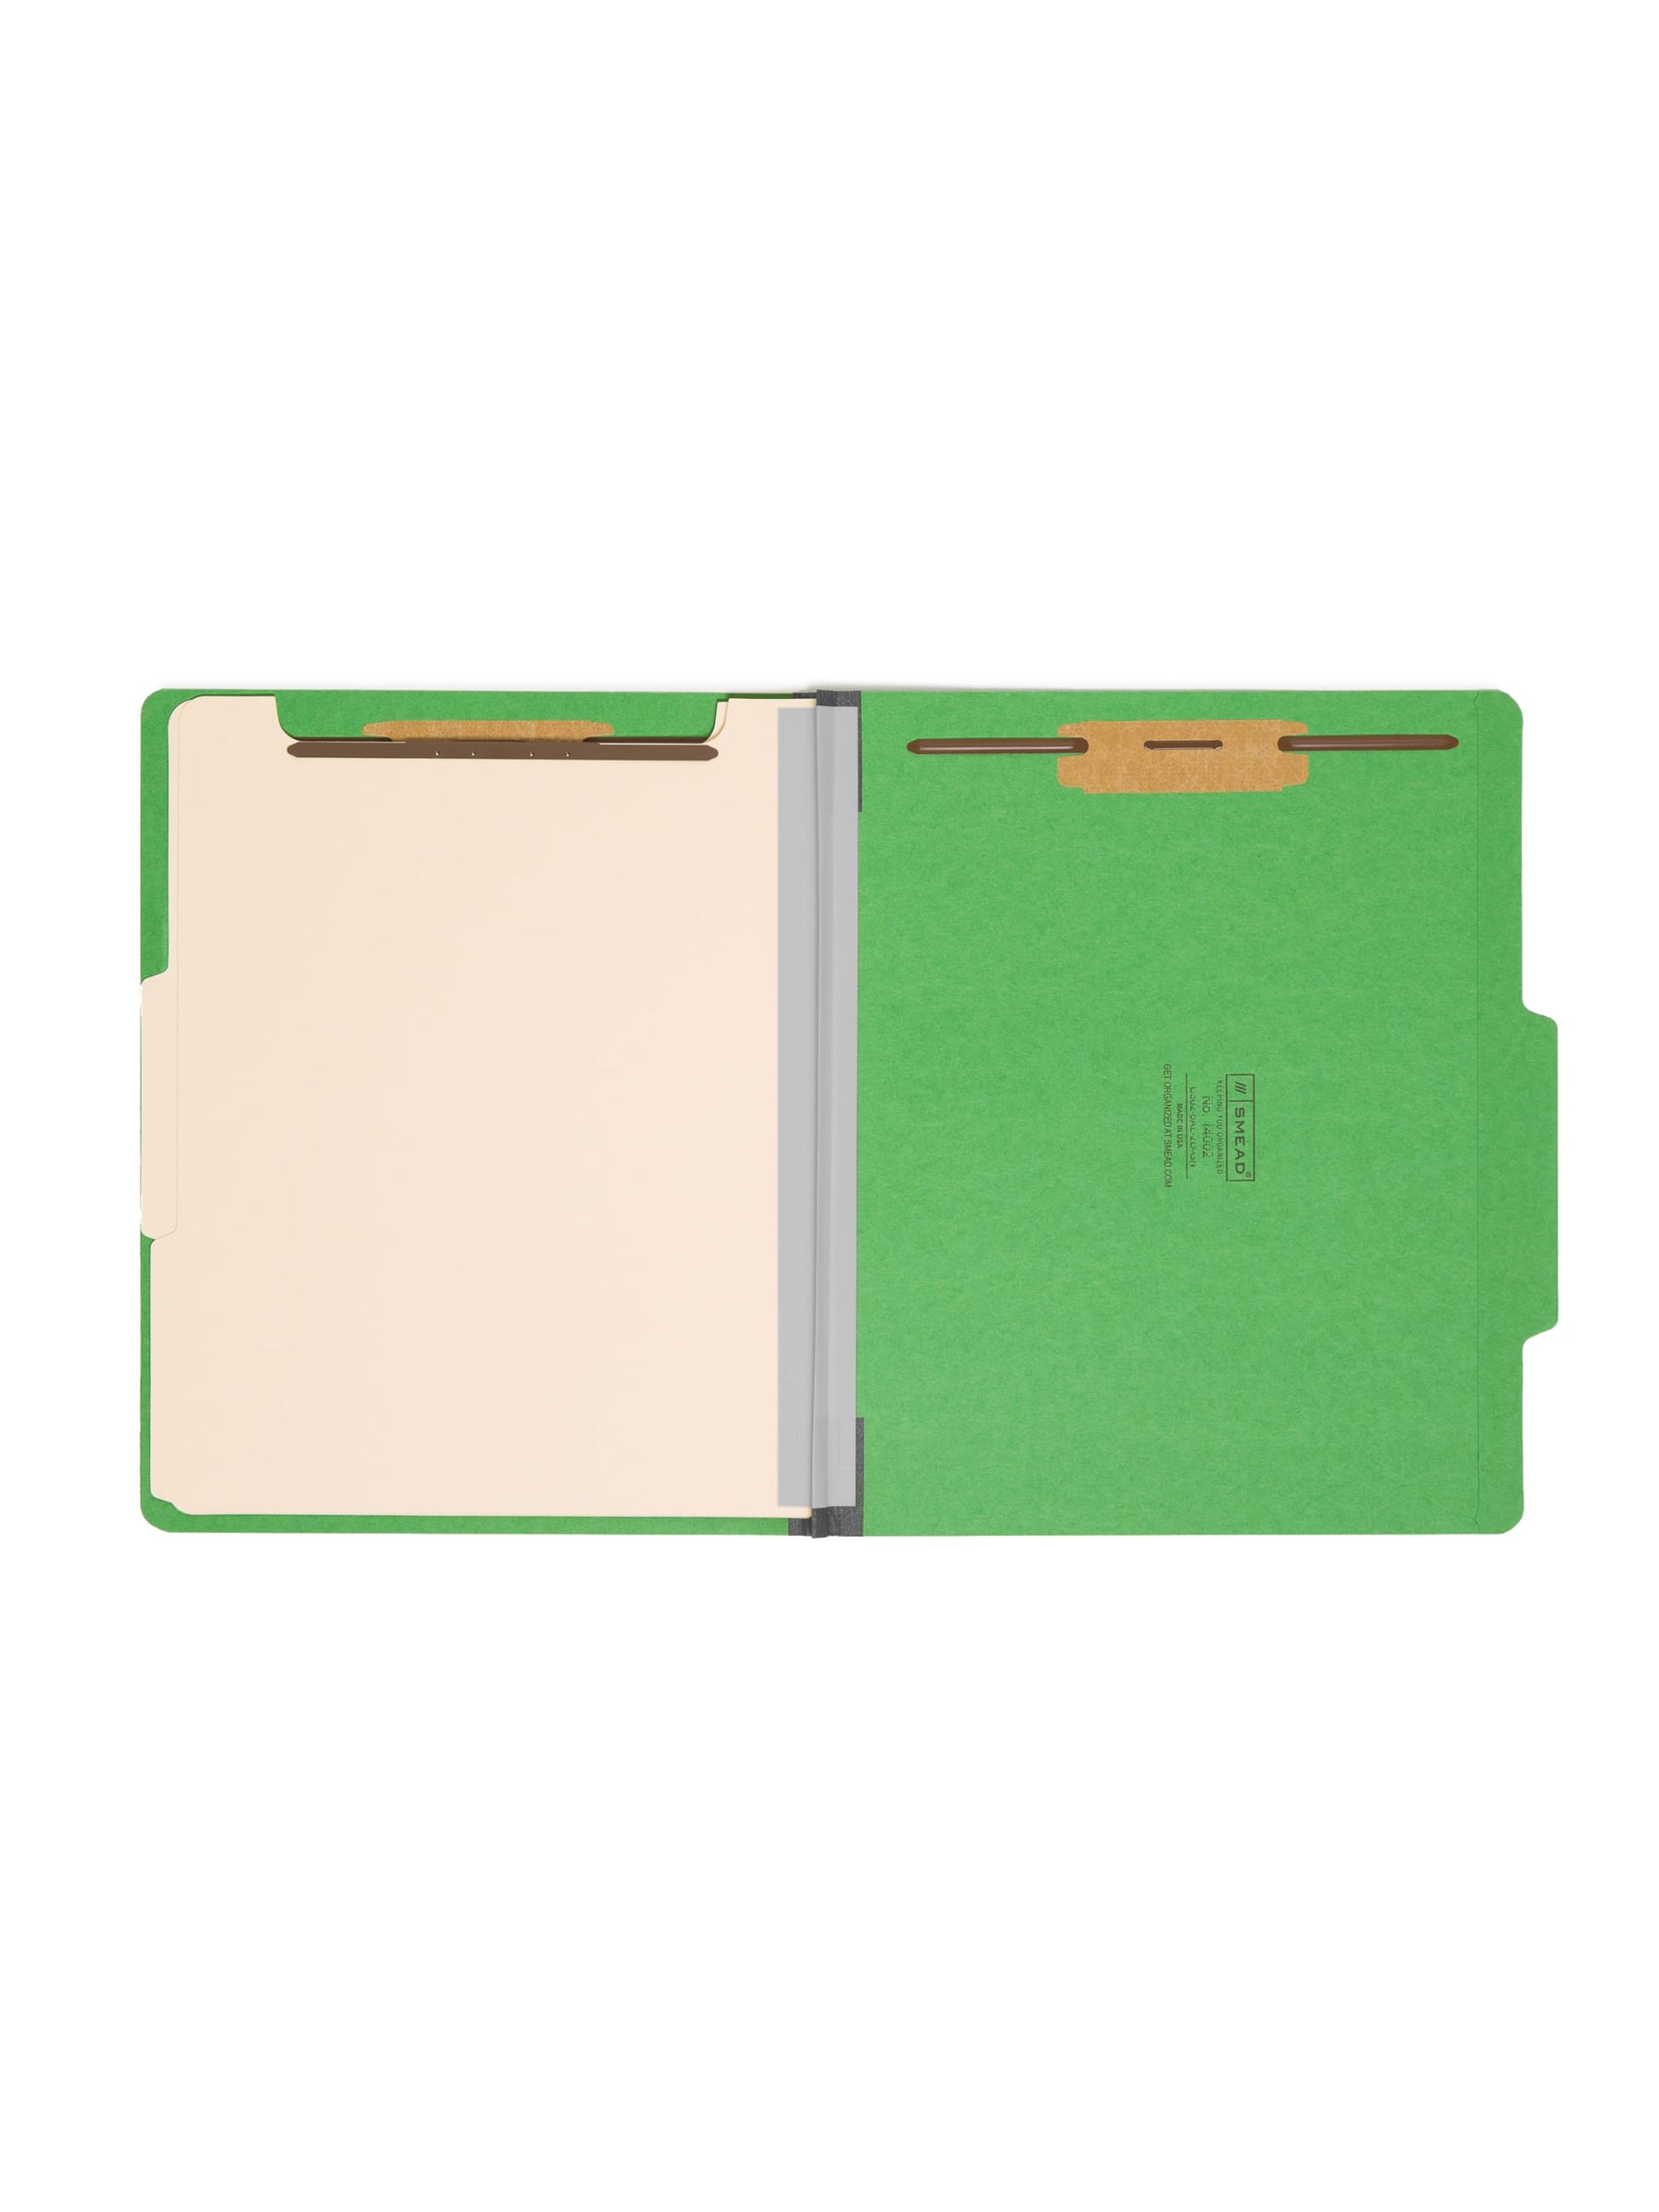 Classification File Folders, 2 Dividers, 2 inch Expansion, Green Color, Letter Size, Set of 0, 30086486140028